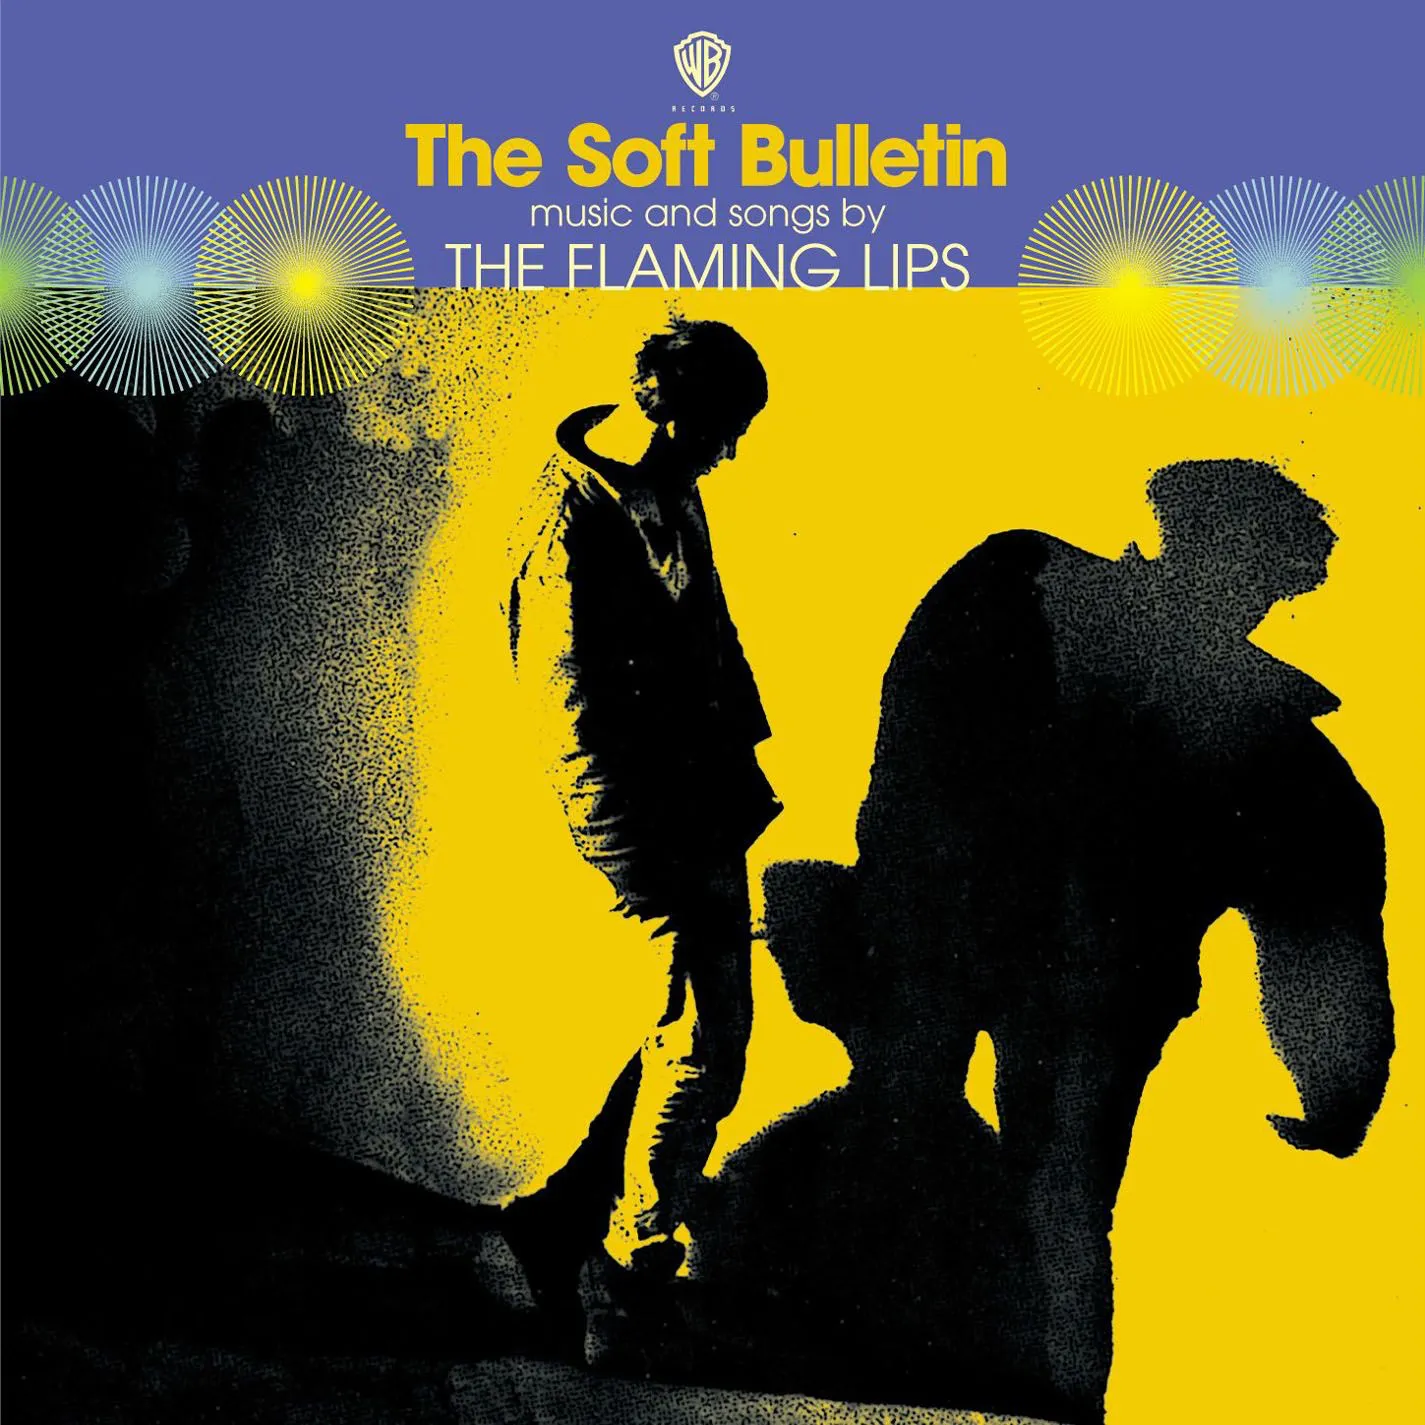 <strong>The Flaming Lips - The Soft Bulletin</strong> (Vinyl LP - black)